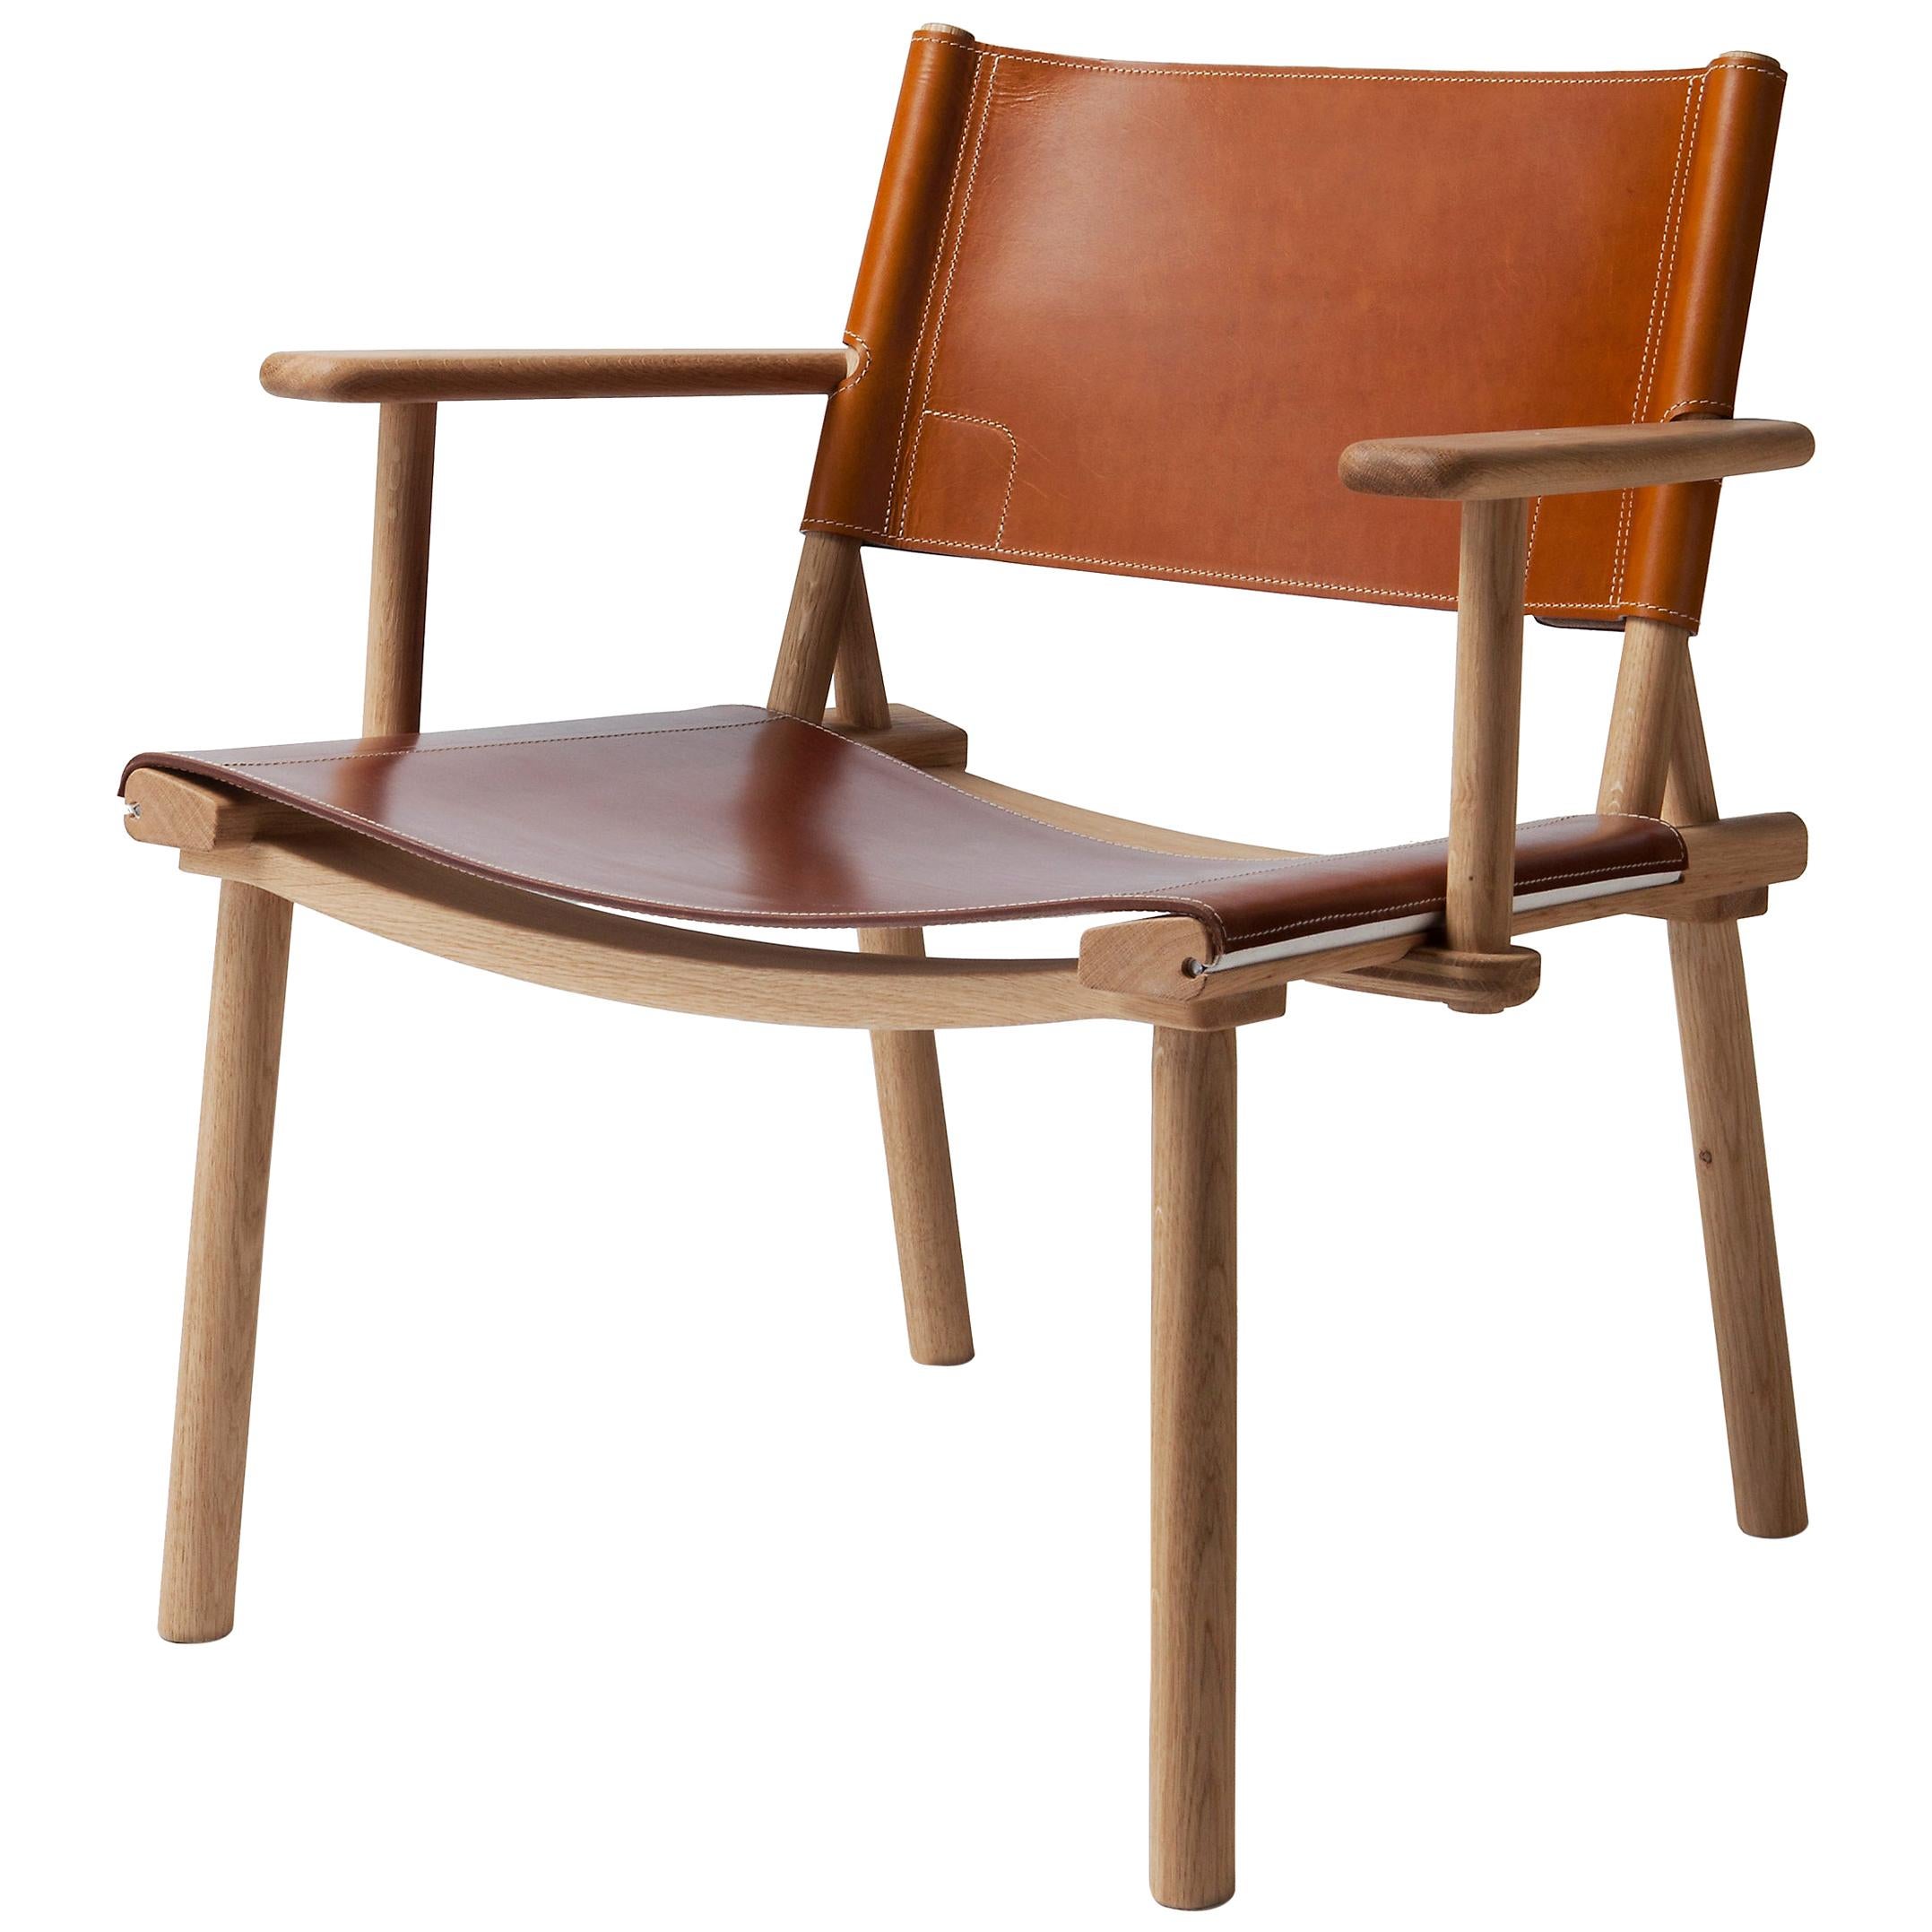 December Lounge Chair with leather upholstery by Jasper Morrison & Wataru Kumano